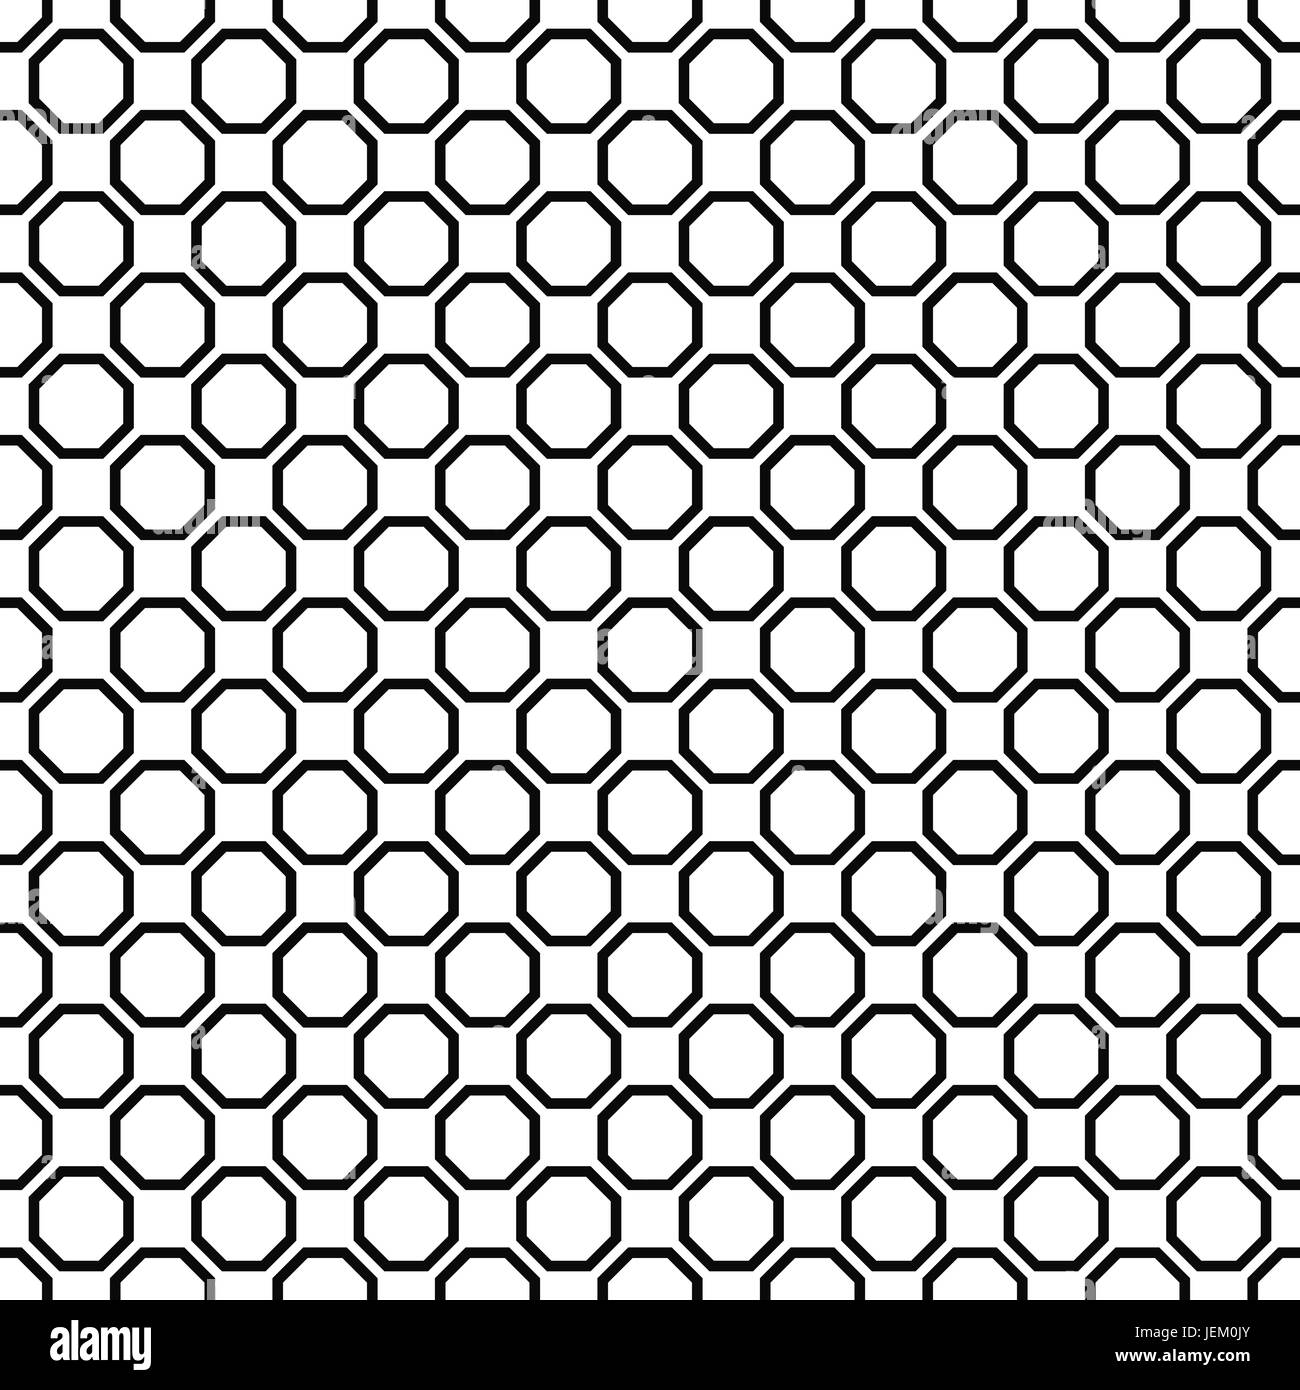 Seamless black and white octagon pattern design Stock Vector